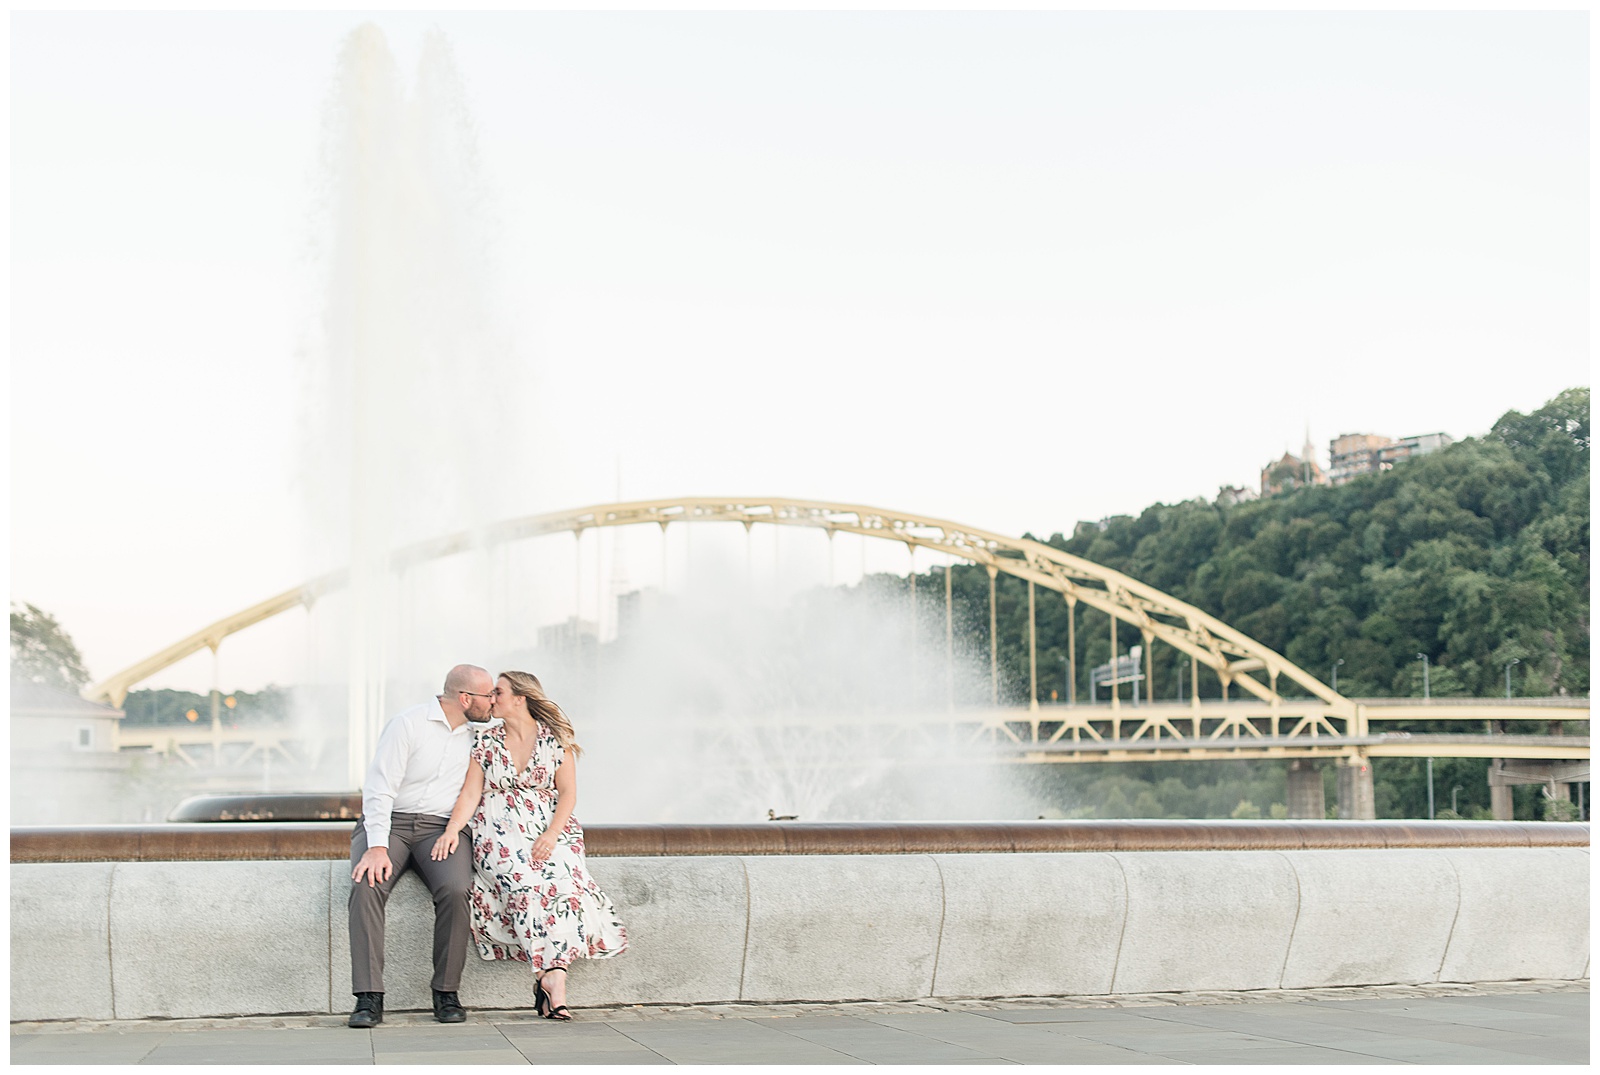 the couple is outdoors sitting along a concrete wall in front of a water fountain and white steel bridge with trees behind it and the guy is on the left and the girl is on the right and they are sitting close together and kissing as the girl rests her right hand on the guy's left knee in downtown Pittsburgh